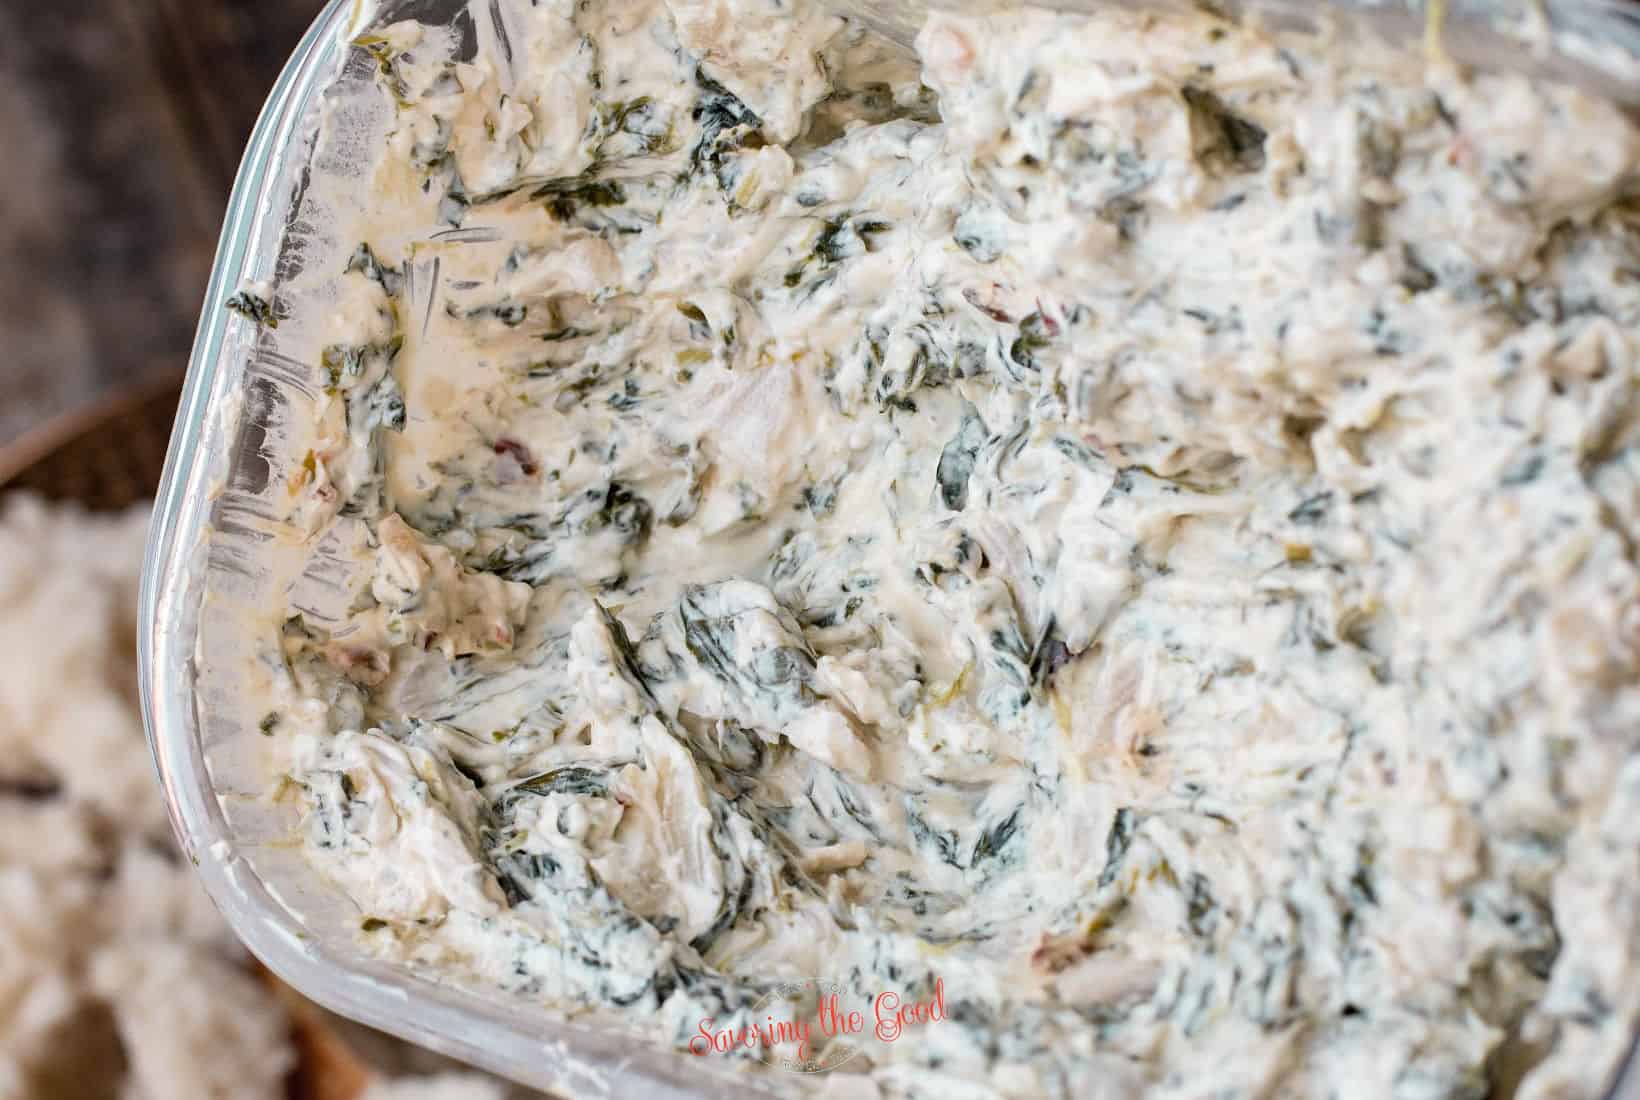 tight shot of Knorr Spinach Dip showing how the dip weeps.